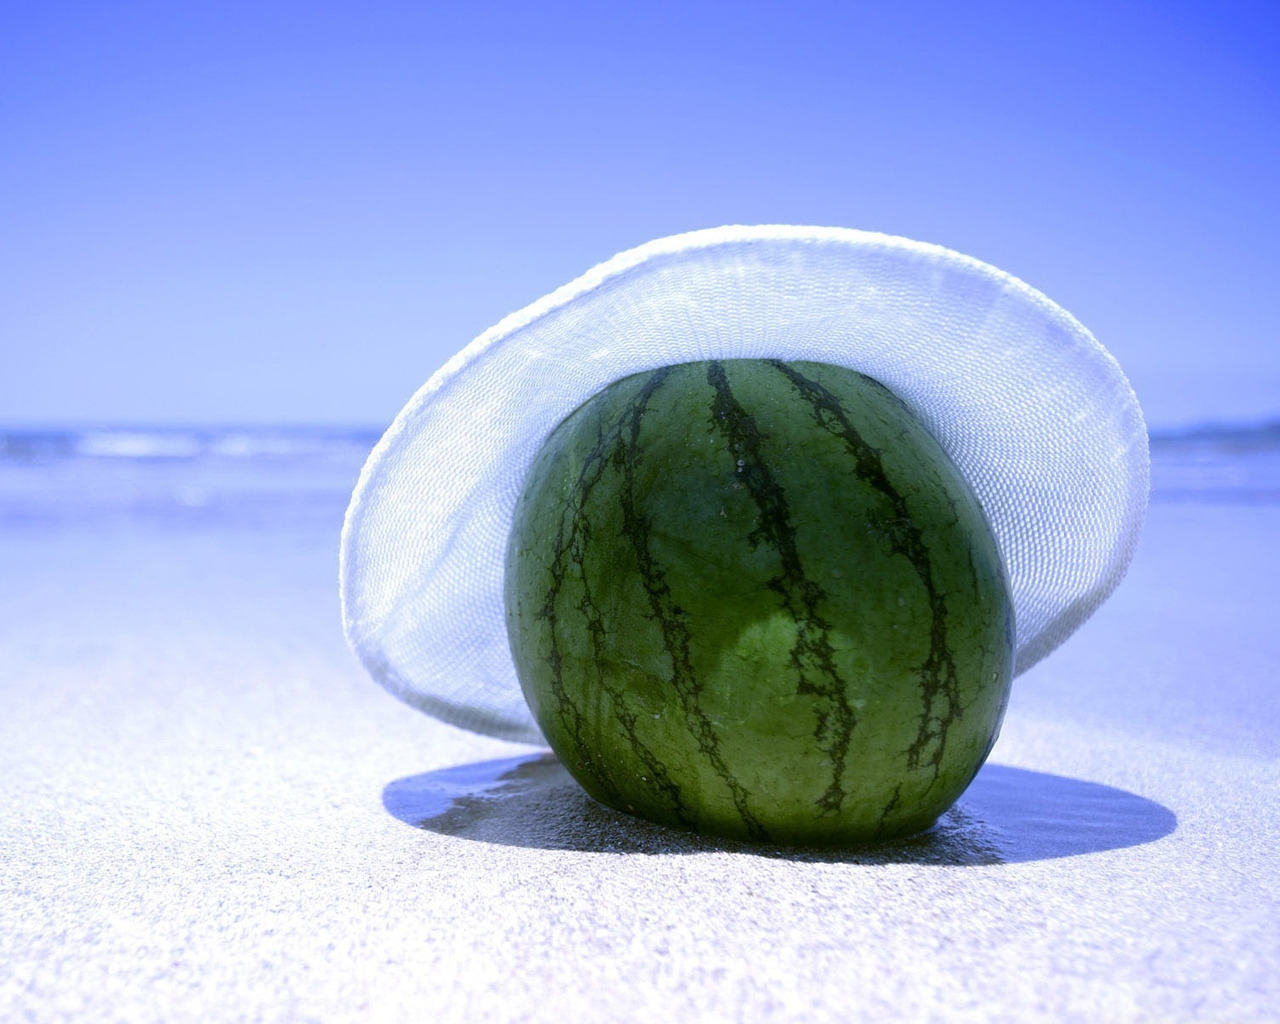 Watermelon on the beach for 1280 x 1024 resolution